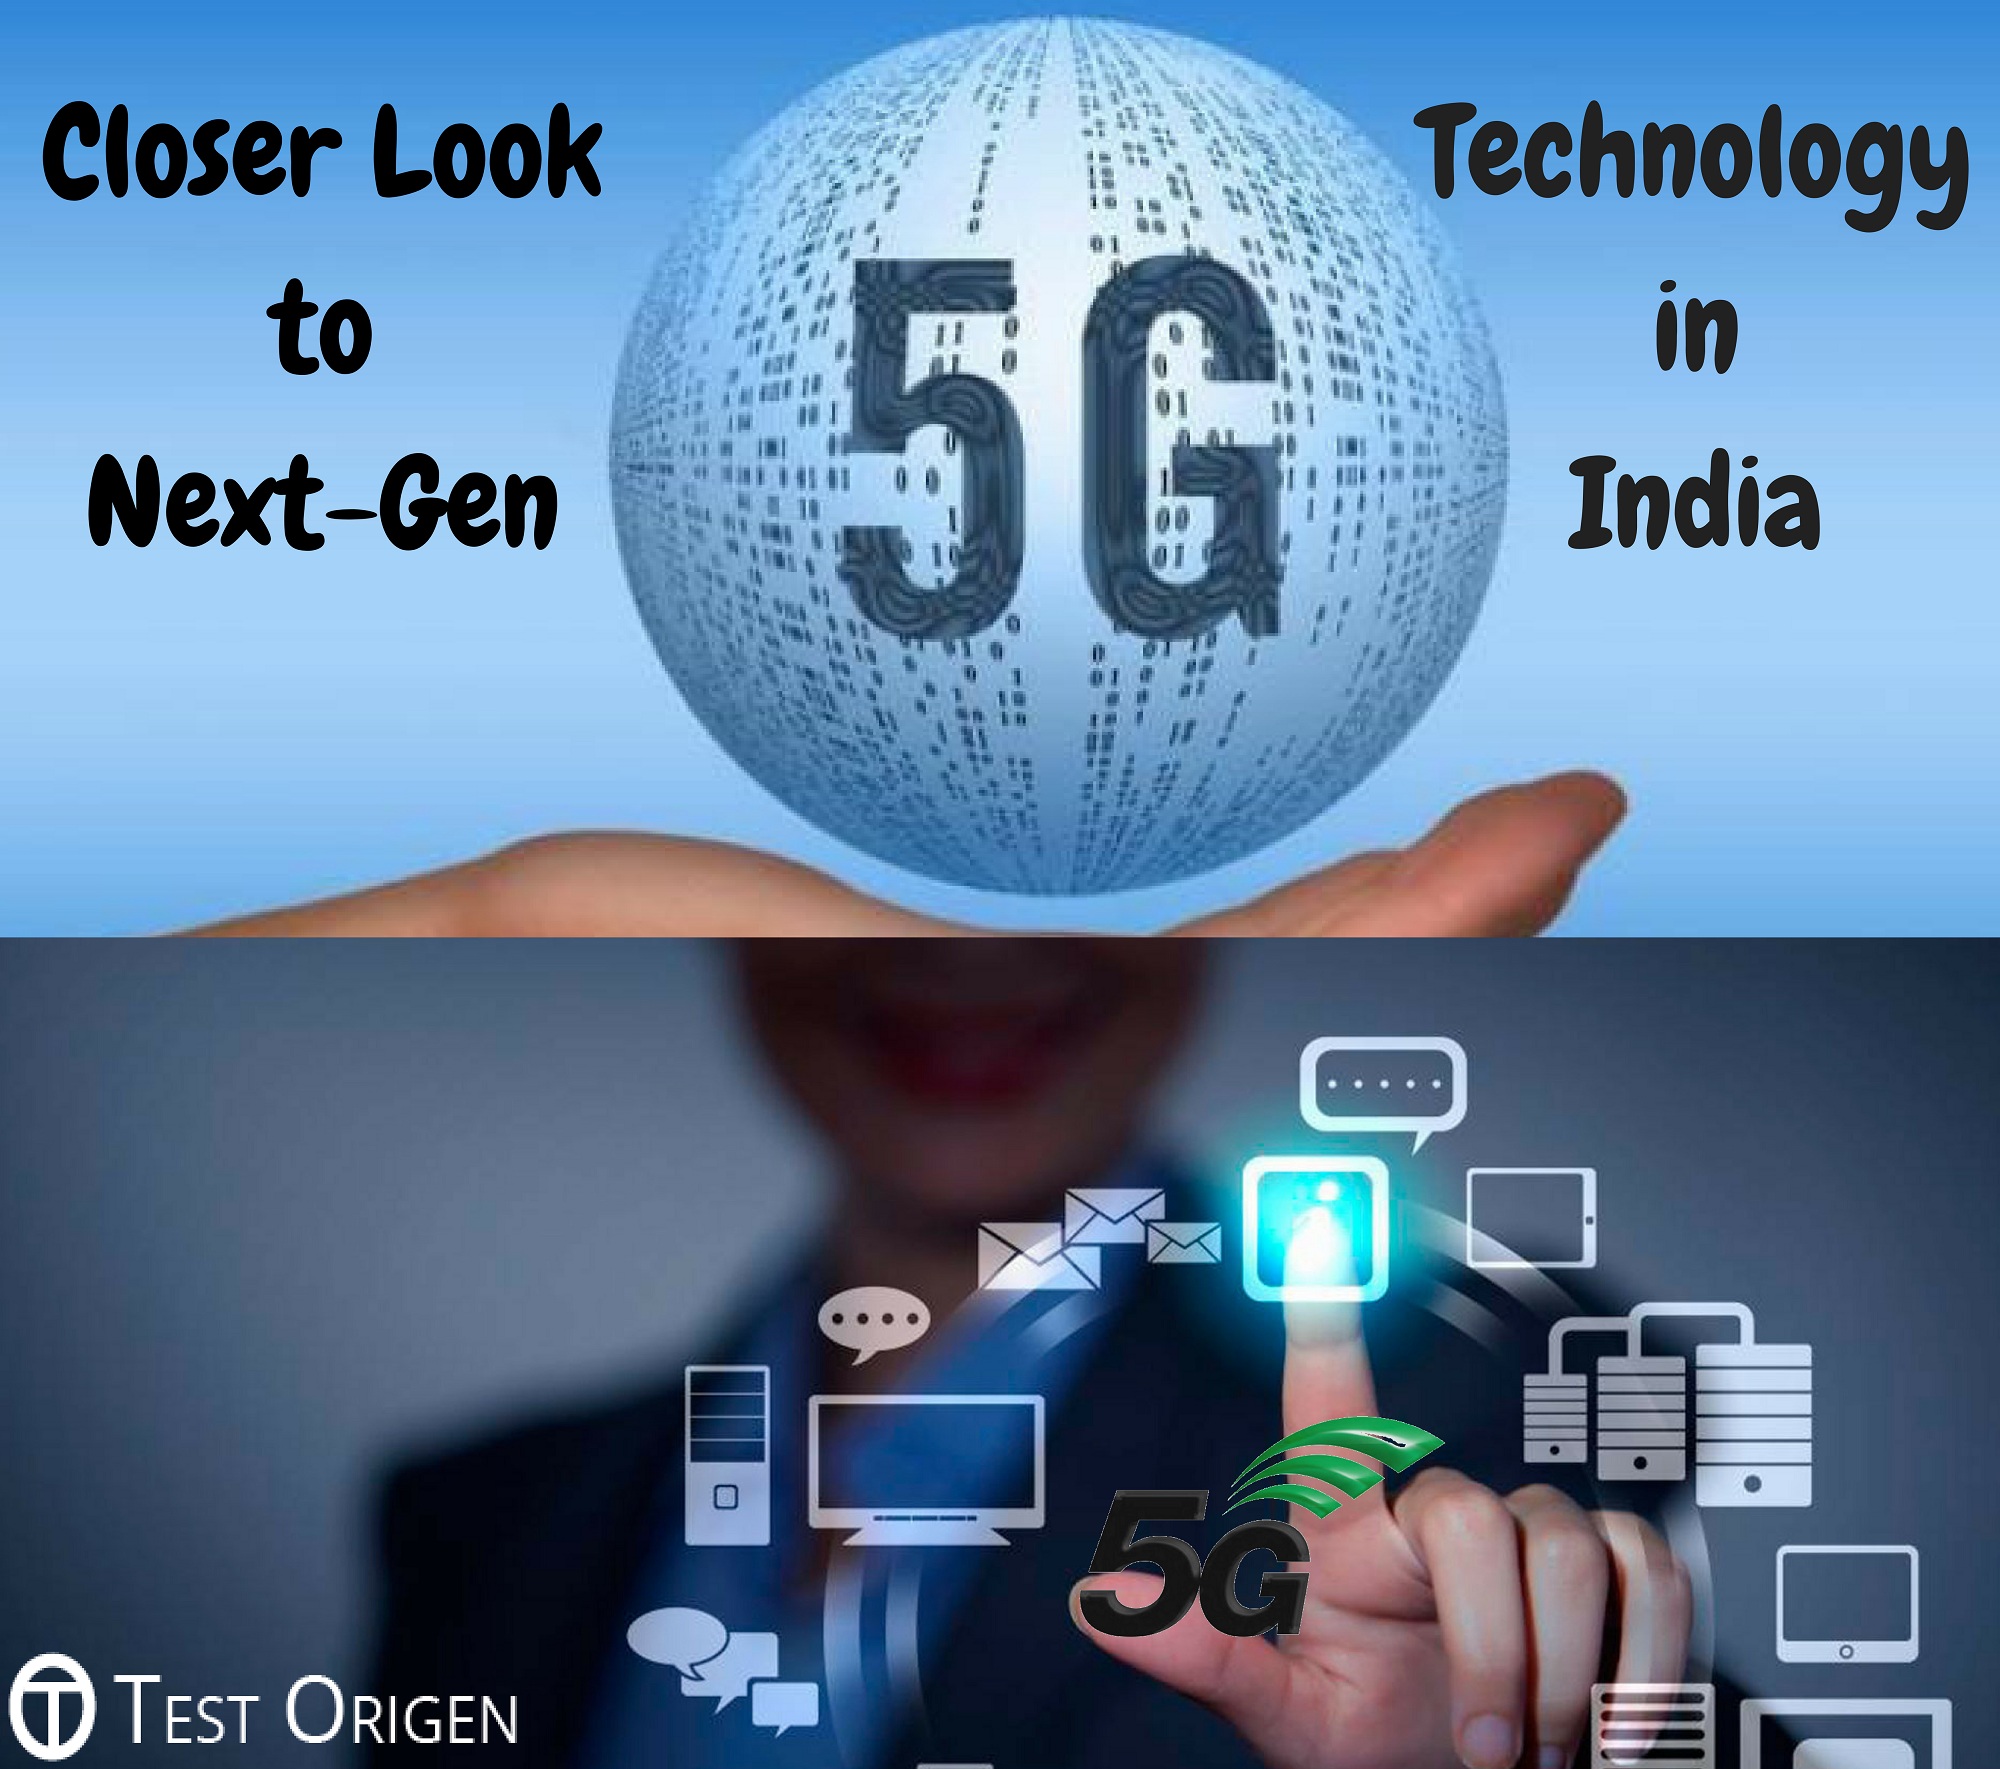 Closer Look to Next-Gen 5G Technology in India